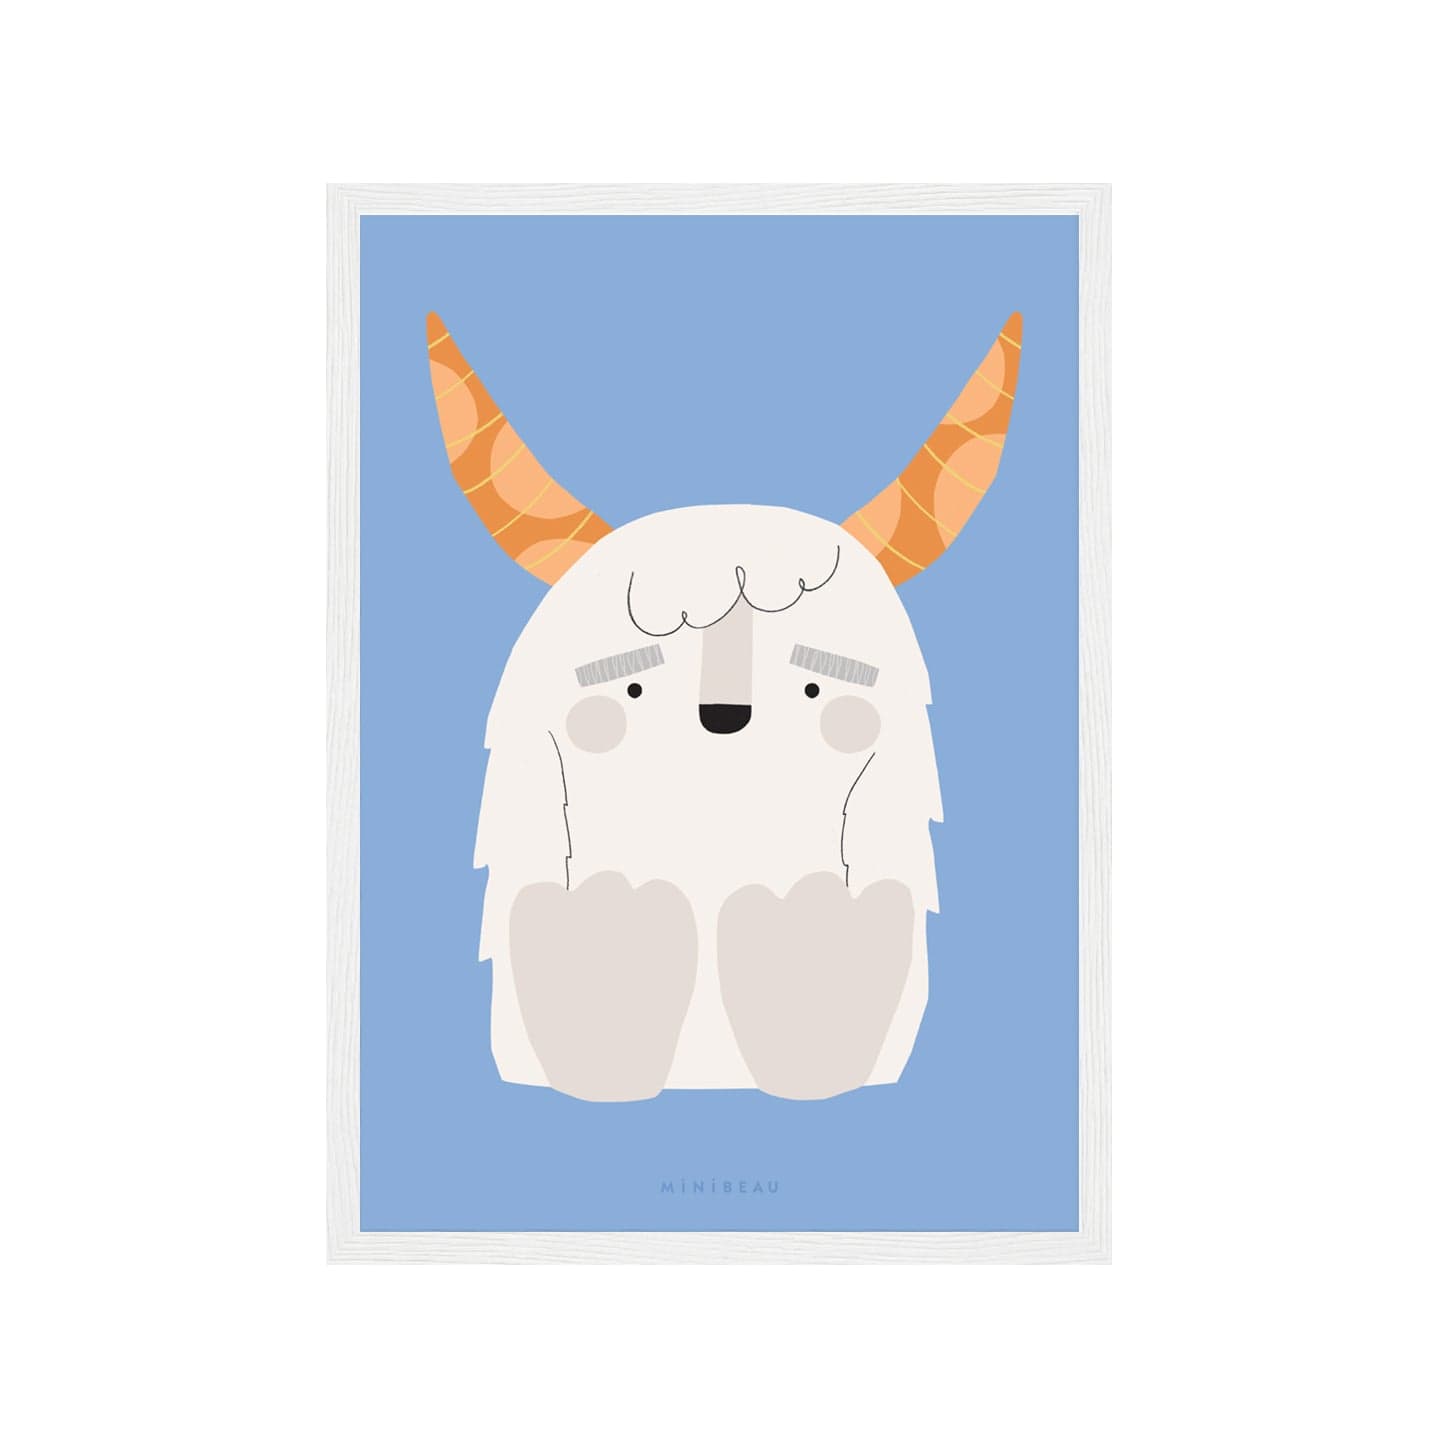 Art print in a white frame. Our Happy Alphabet 'Y' Art Print shows a smiling white Yeti, with big brown horns, sitting to create a Y shape, on a light blue background.